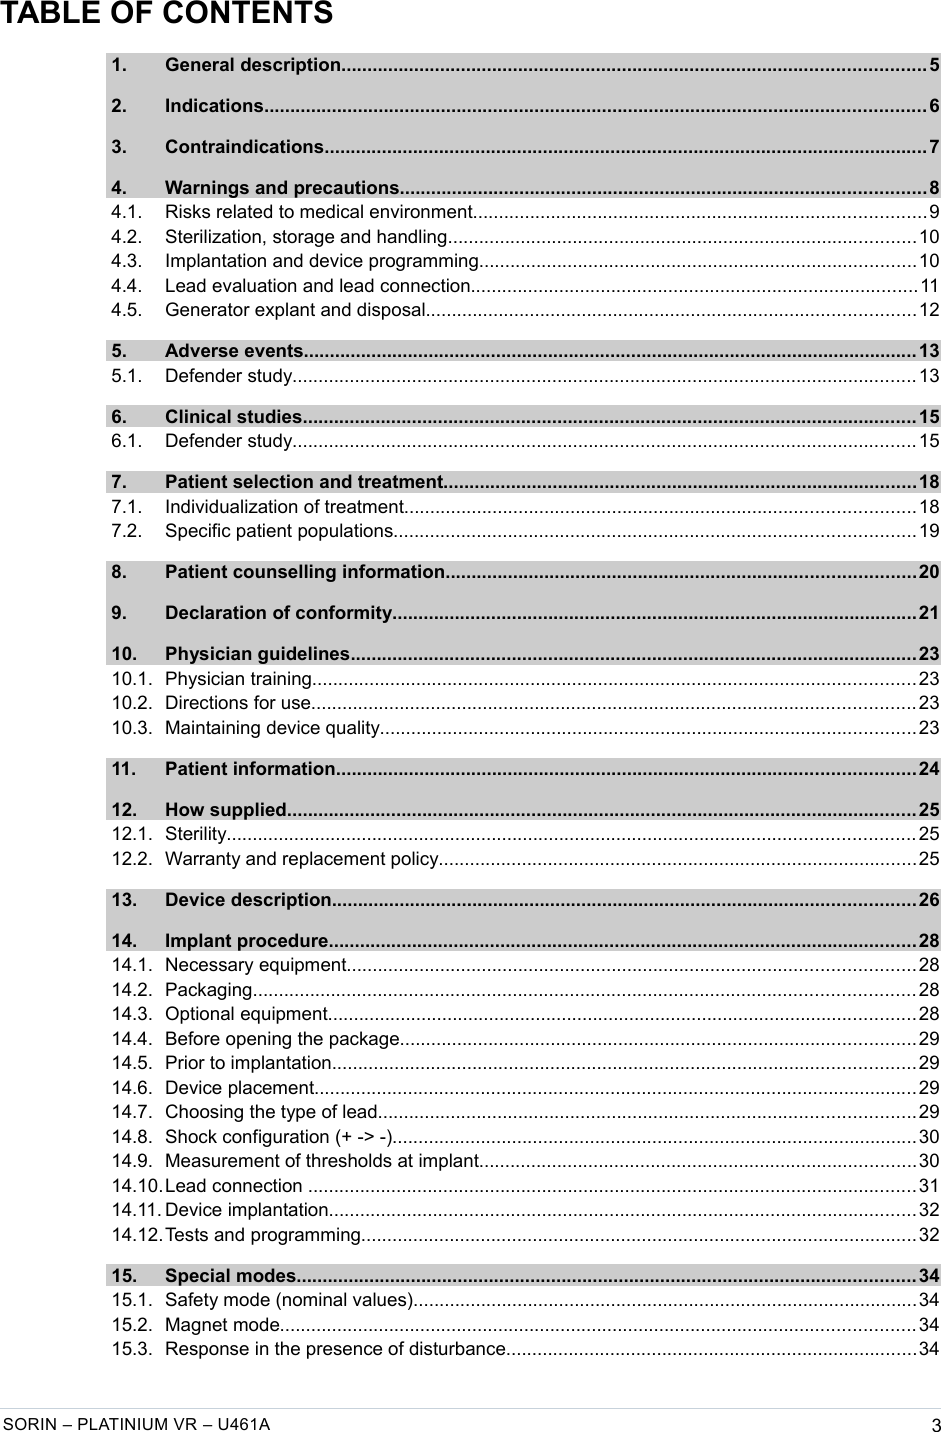   TABLE OF CONTENTS 1. General description................................................................................................................ 5  2. Indications............................................................................................................................... 6  3. Contraindications....................................................................................................................7  4. Warnings and precautions.....................................................................................................8  4.1. Risks related to medical environment.......................................................................................9  4.2. Sterilization, storage and handling..........................................................................................10  4.3. Implantation and device programming....................................................................................10  4.4. Lead evaluation and lead connection......................................................................................11  4.5. Generator explant and disposal..............................................................................................12  5. Adverse events...................................................................................................................... 13  5.1. Defender study........................................................................................................................ 13  6. Clinical studies...................................................................................................................... 15  6.1. Defender study........................................................................................................................ 15  7. Patient selection and treatment...........................................................................................18  7.1. Individualization of treatment..................................................................................................18  7.2. Specific patient populations....................................................................................................19  8. Patient counselling information..........................................................................................20  9. Declaration of conformity.....................................................................................................21  10. Physician guidelines.............................................................................................................23  10.1. Physician training.................................................................................................................... 23  10.2. Directions for use.................................................................................................................... 23  10.3. Maintaining device quality.......................................................................................................23  11. Patient information............................................................................................................... 24  12. How supplied......................................................................................................................... 25  12.1. Sterility.................................................................................................................................... 25  12.2. Warranty and replacement policy............................................................................................25  13. Device description................................................................................................................ 26  14. Implant procedure................................................................................................................. 28  14.1. Necessary equipment.............................................................................................................28  14.2. Packaging............................................................................................................................... 28  14.3. Optional equipment.................................................................................................................28  14.4. Before opening the package...................................................................................................29  14.5. Prior to implantation................................................................................................................29  14.6. Device placement.................................................................................................................... 29  14.7. Choosing the type of lead.......................................................................................................29  14.8. Shock configuration (+ -&gt; -).....................................................................................................30  14.9. Measurement of thresholds at implant....................................................................................30  14.10.Lead connection ..................................................................................................................... 31  14.11. Device implantation.................................................................................................................32  14.12.Tests and programming...........................................................................................................32  15. Special modes....................................................................................................................... 34  15.1. Safety mode (nominal values).................................................................................................34  15.2. Magnet mode.......................................................................................................................... 34  15.3. Response in the presence of disturbance...............................................................................34 SORIN – PLATINIUM VR – U461A 3